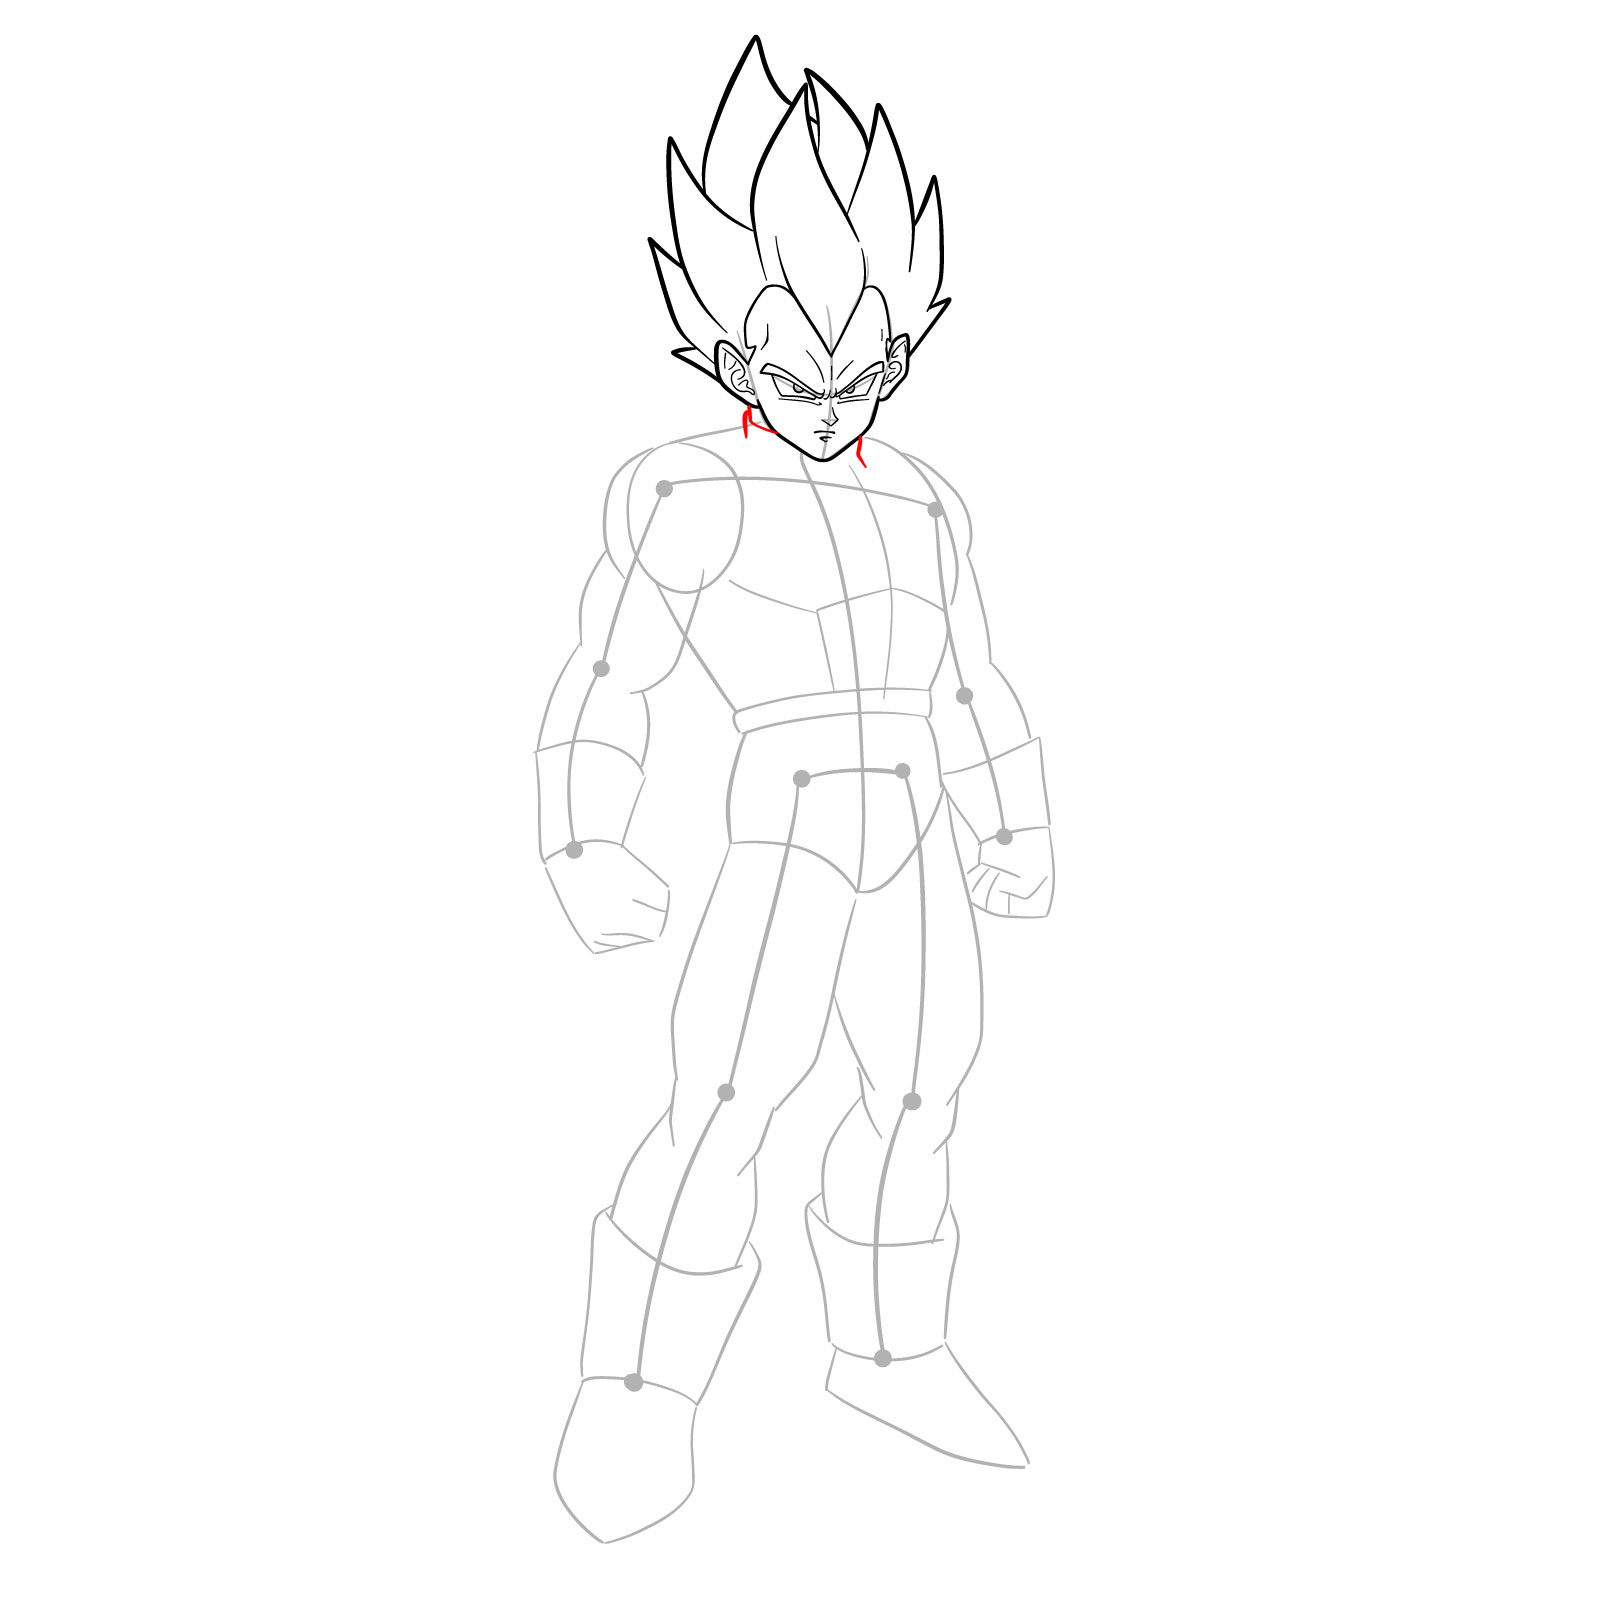 How to draw Vegeta in SSGSS - step 17